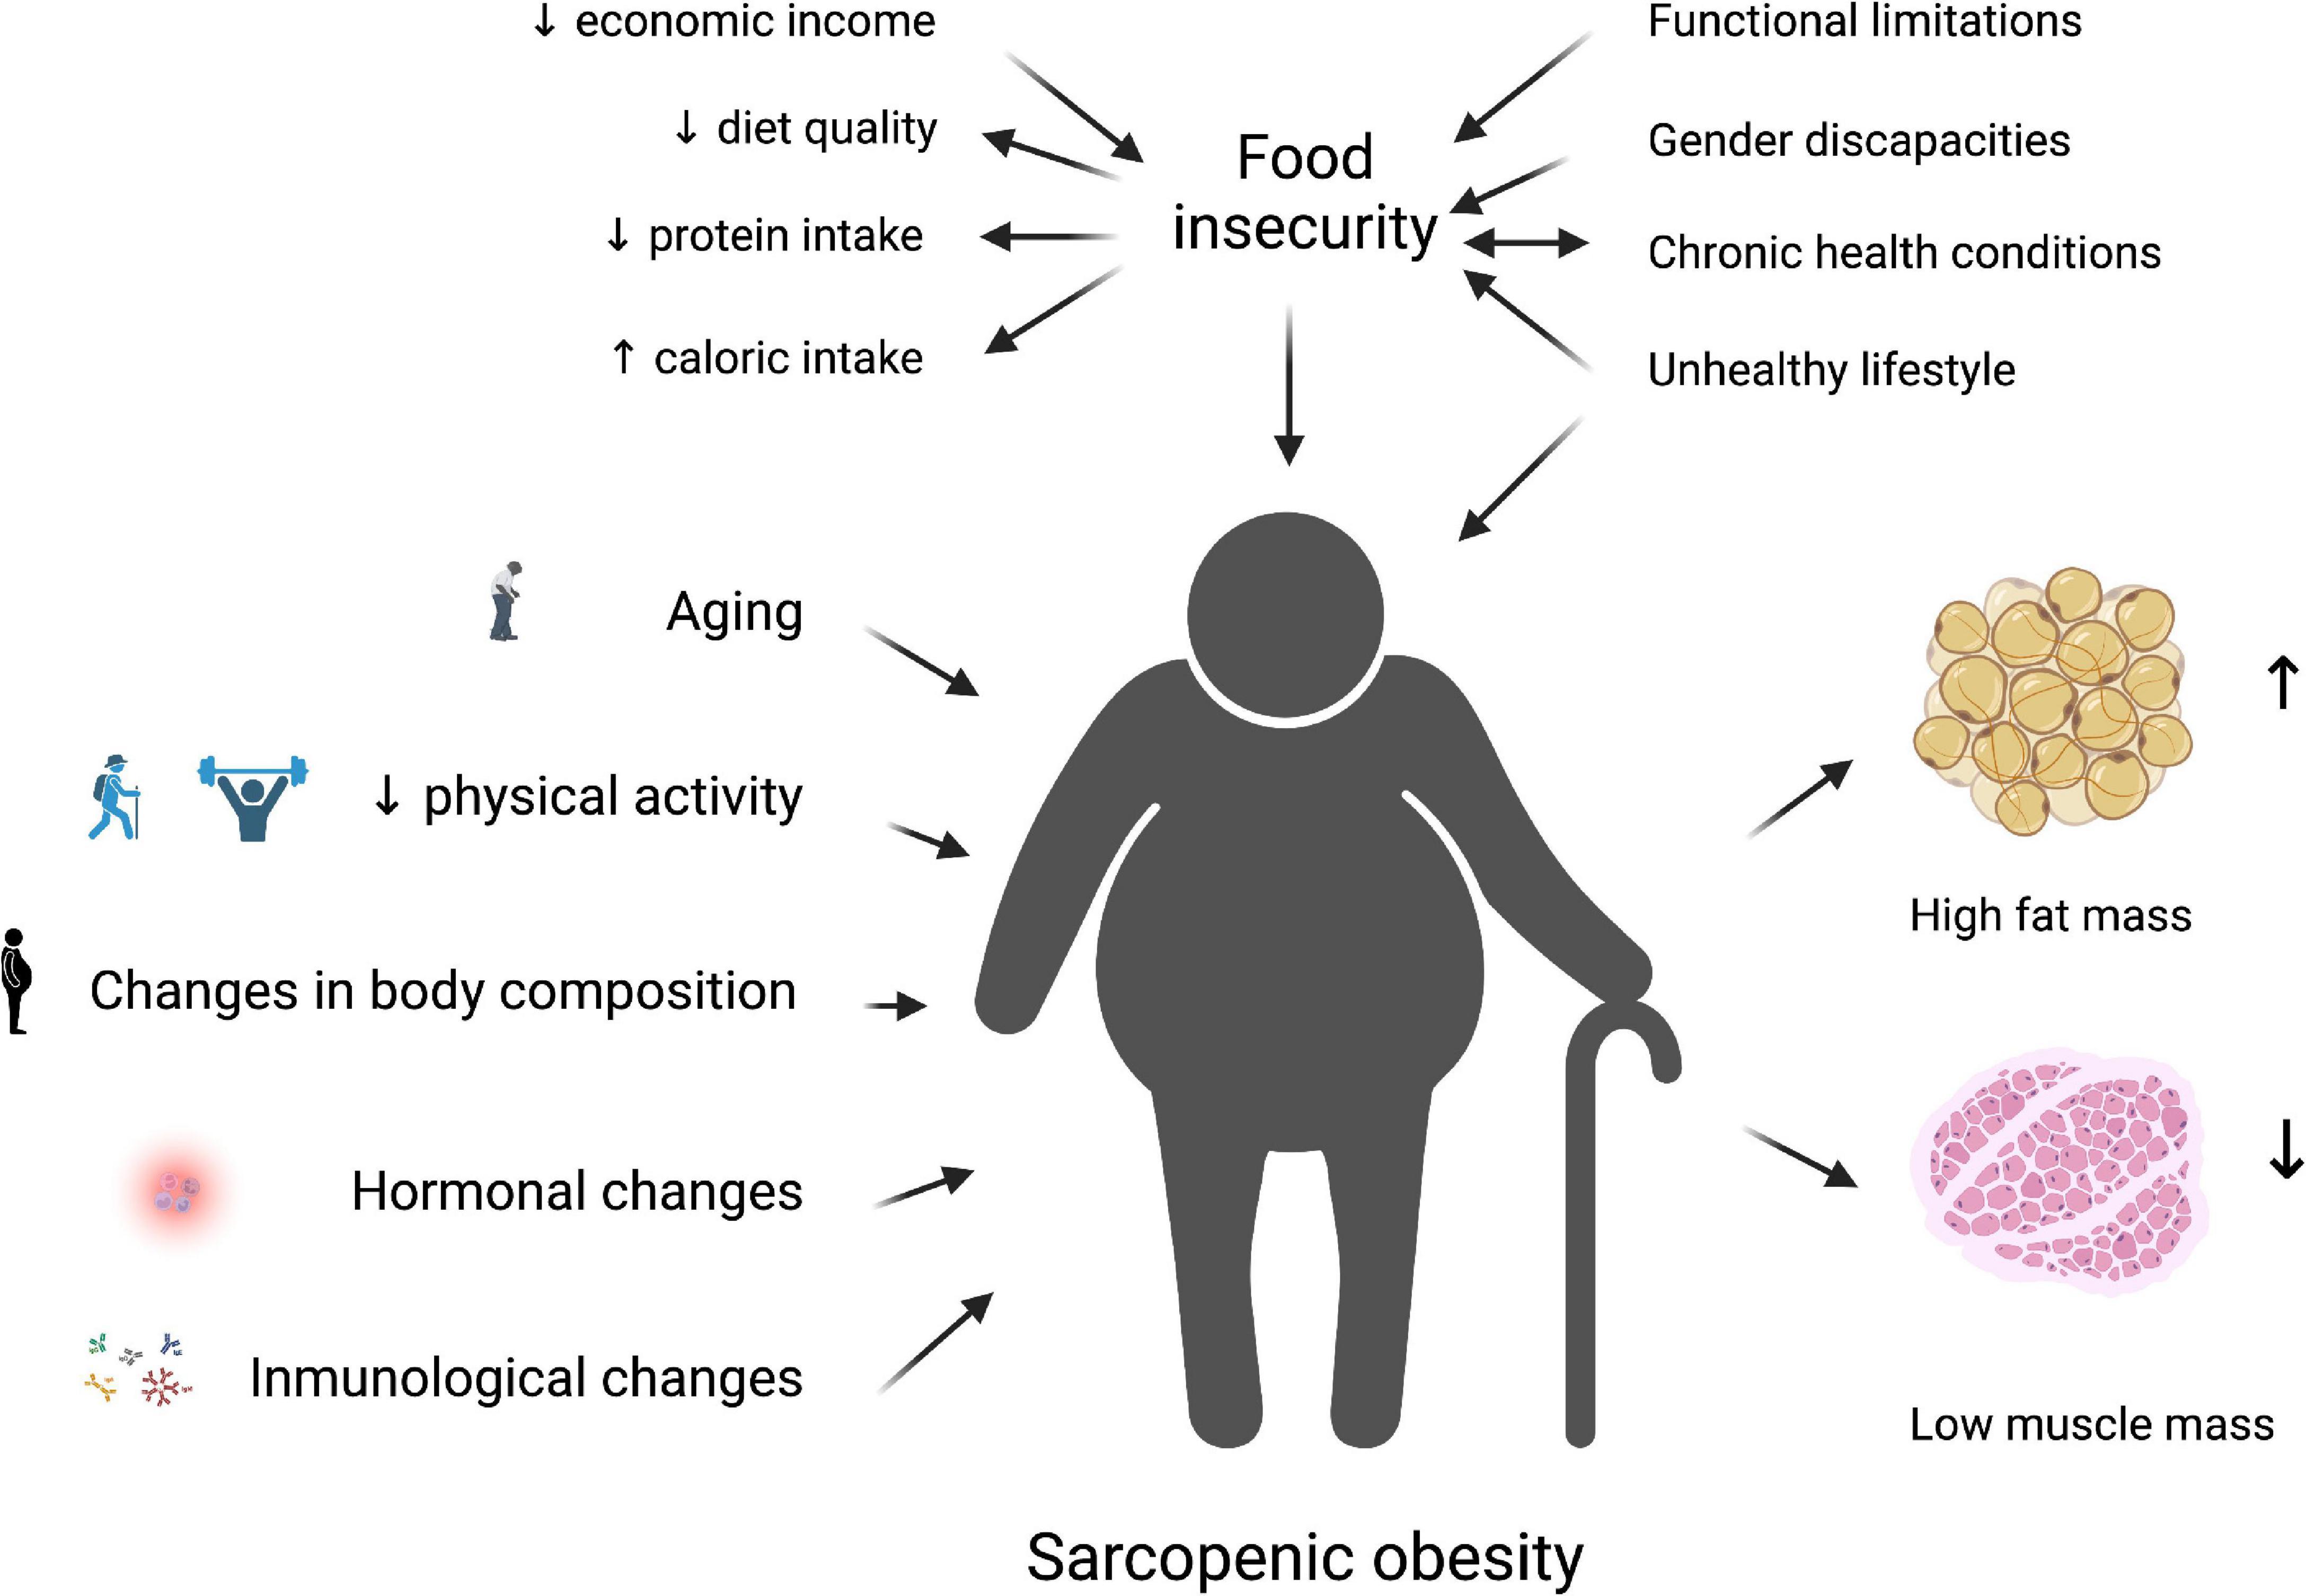 Frontiers  Food insecurity as a risk factor of sarcopenic obesity